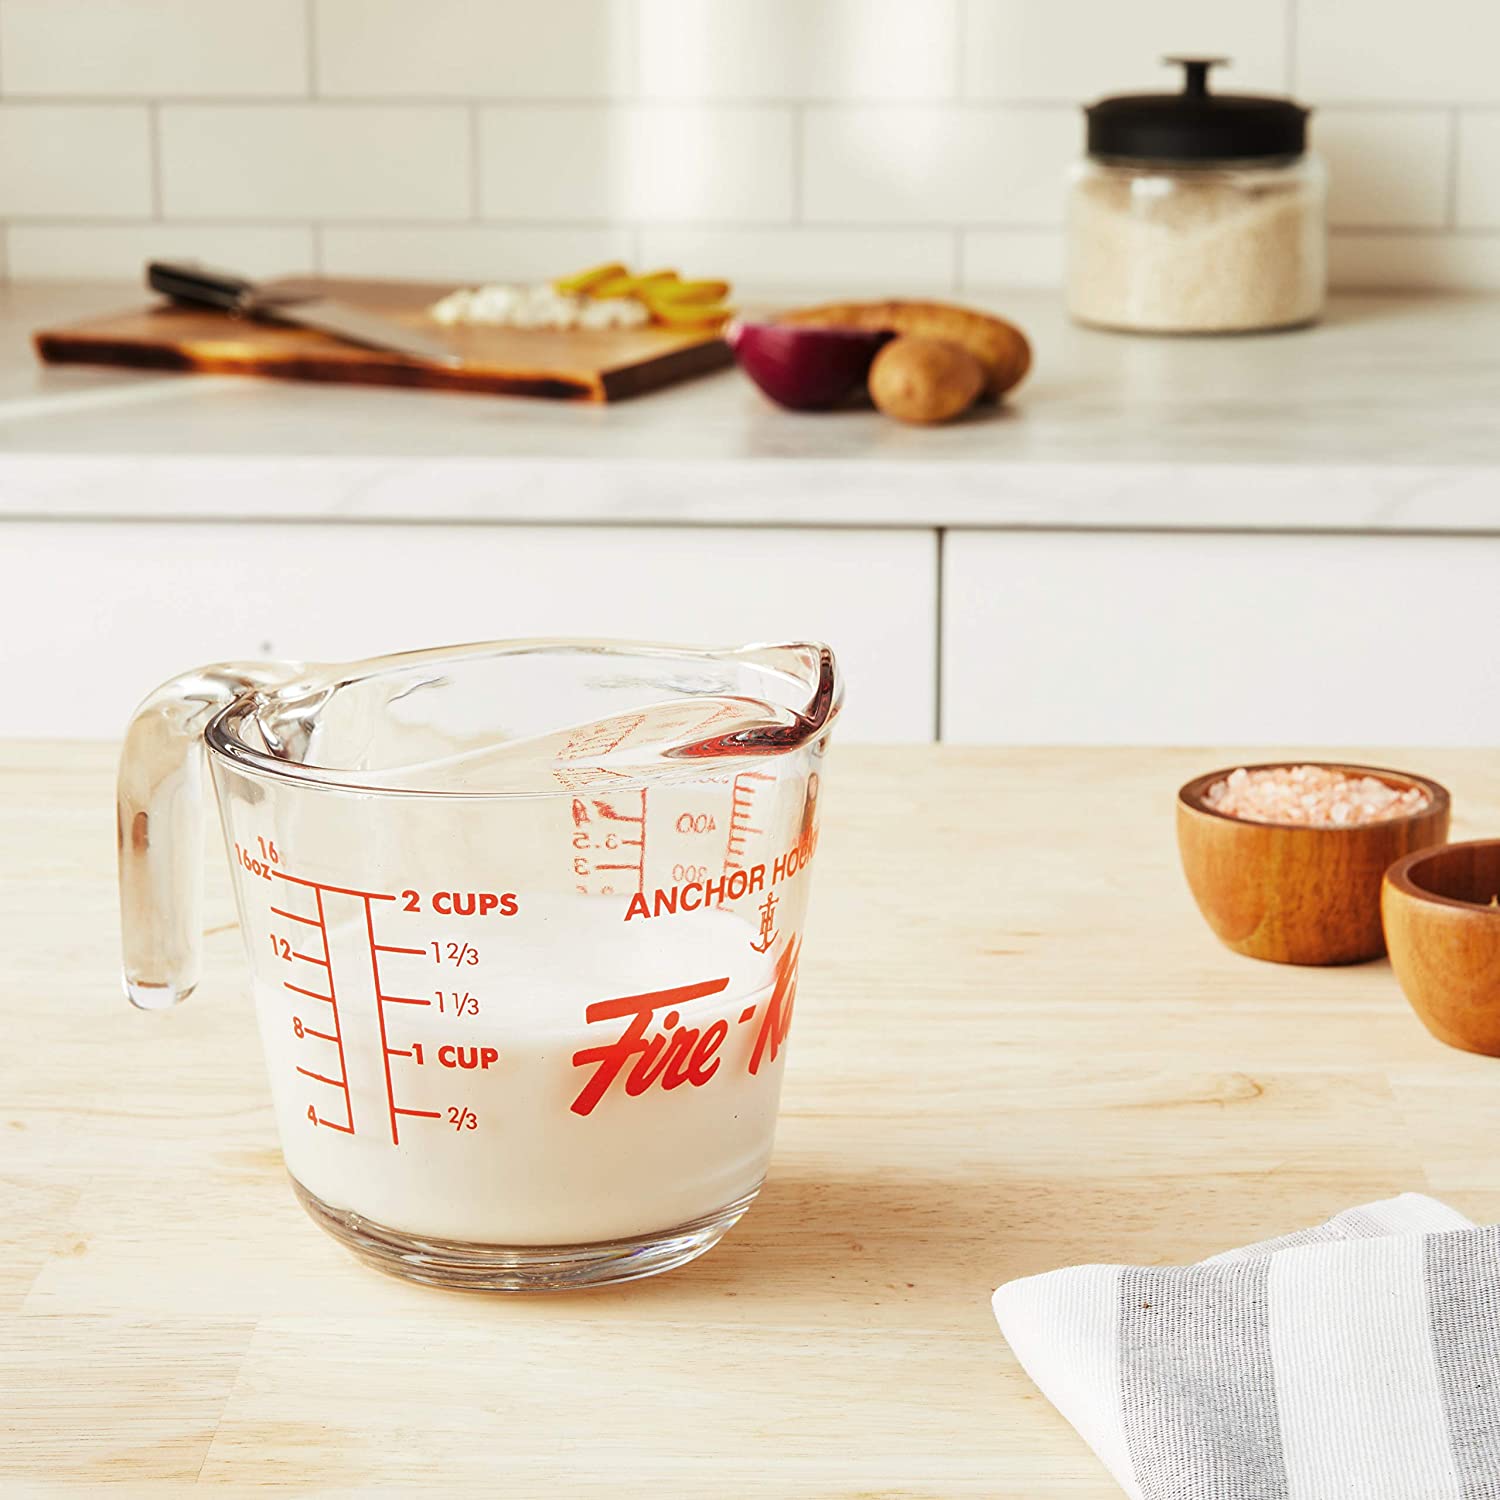 Fire-King Measuring Cup 2-cup 500 ml